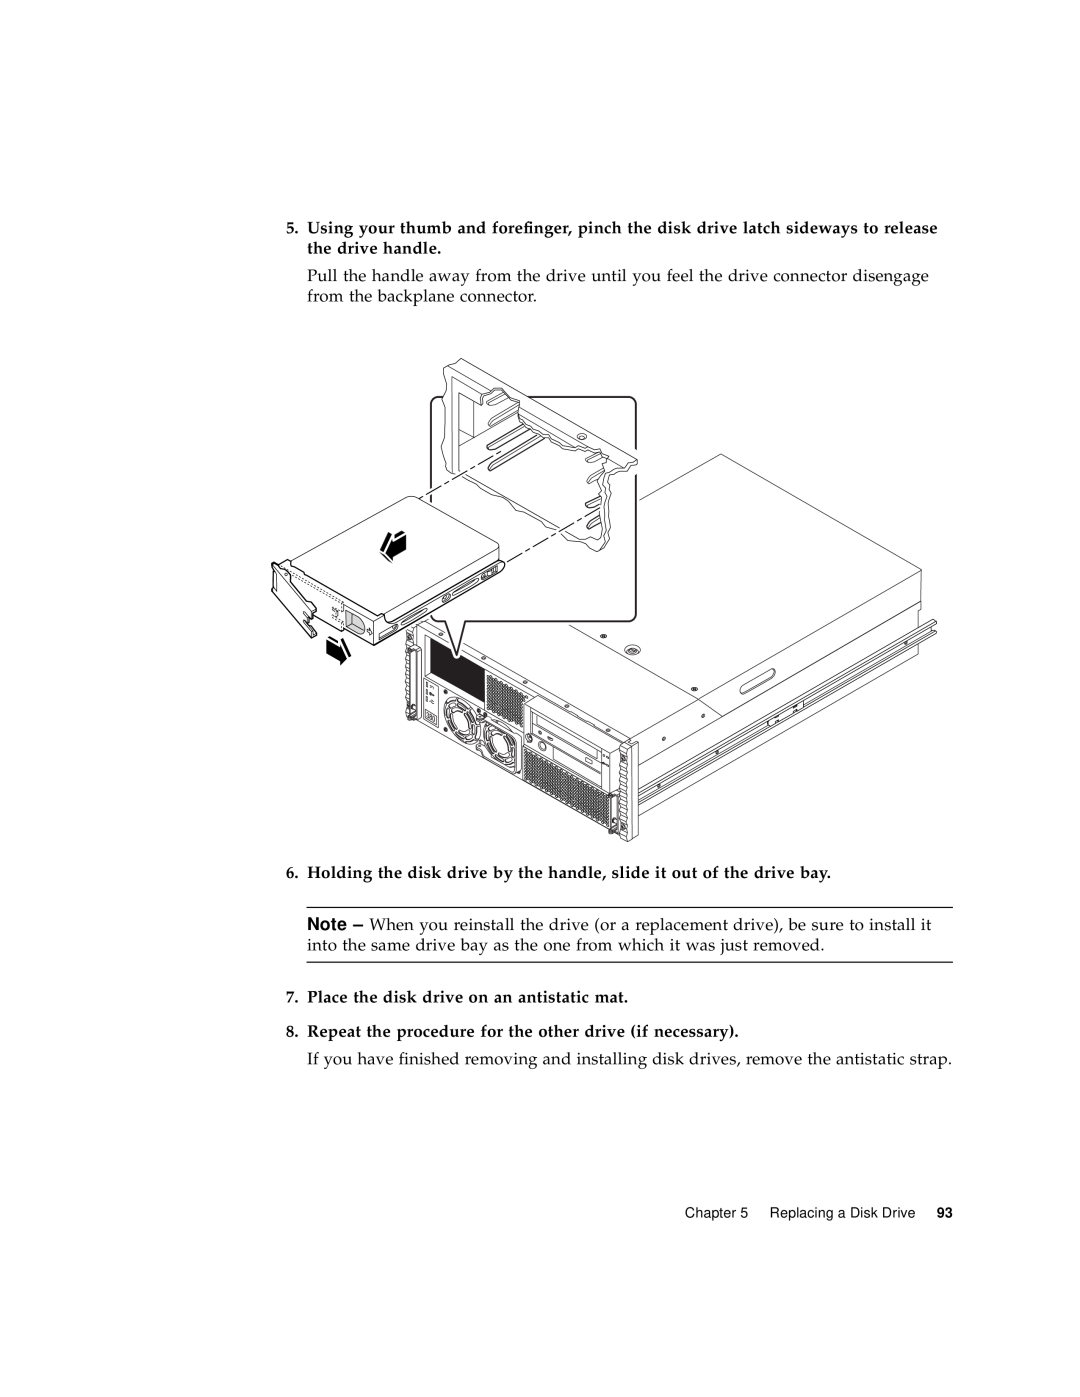 Sun Microsystems 220R Place the disk drive on an antistatic mat, Repeat the procedure for the other drive if necessary 